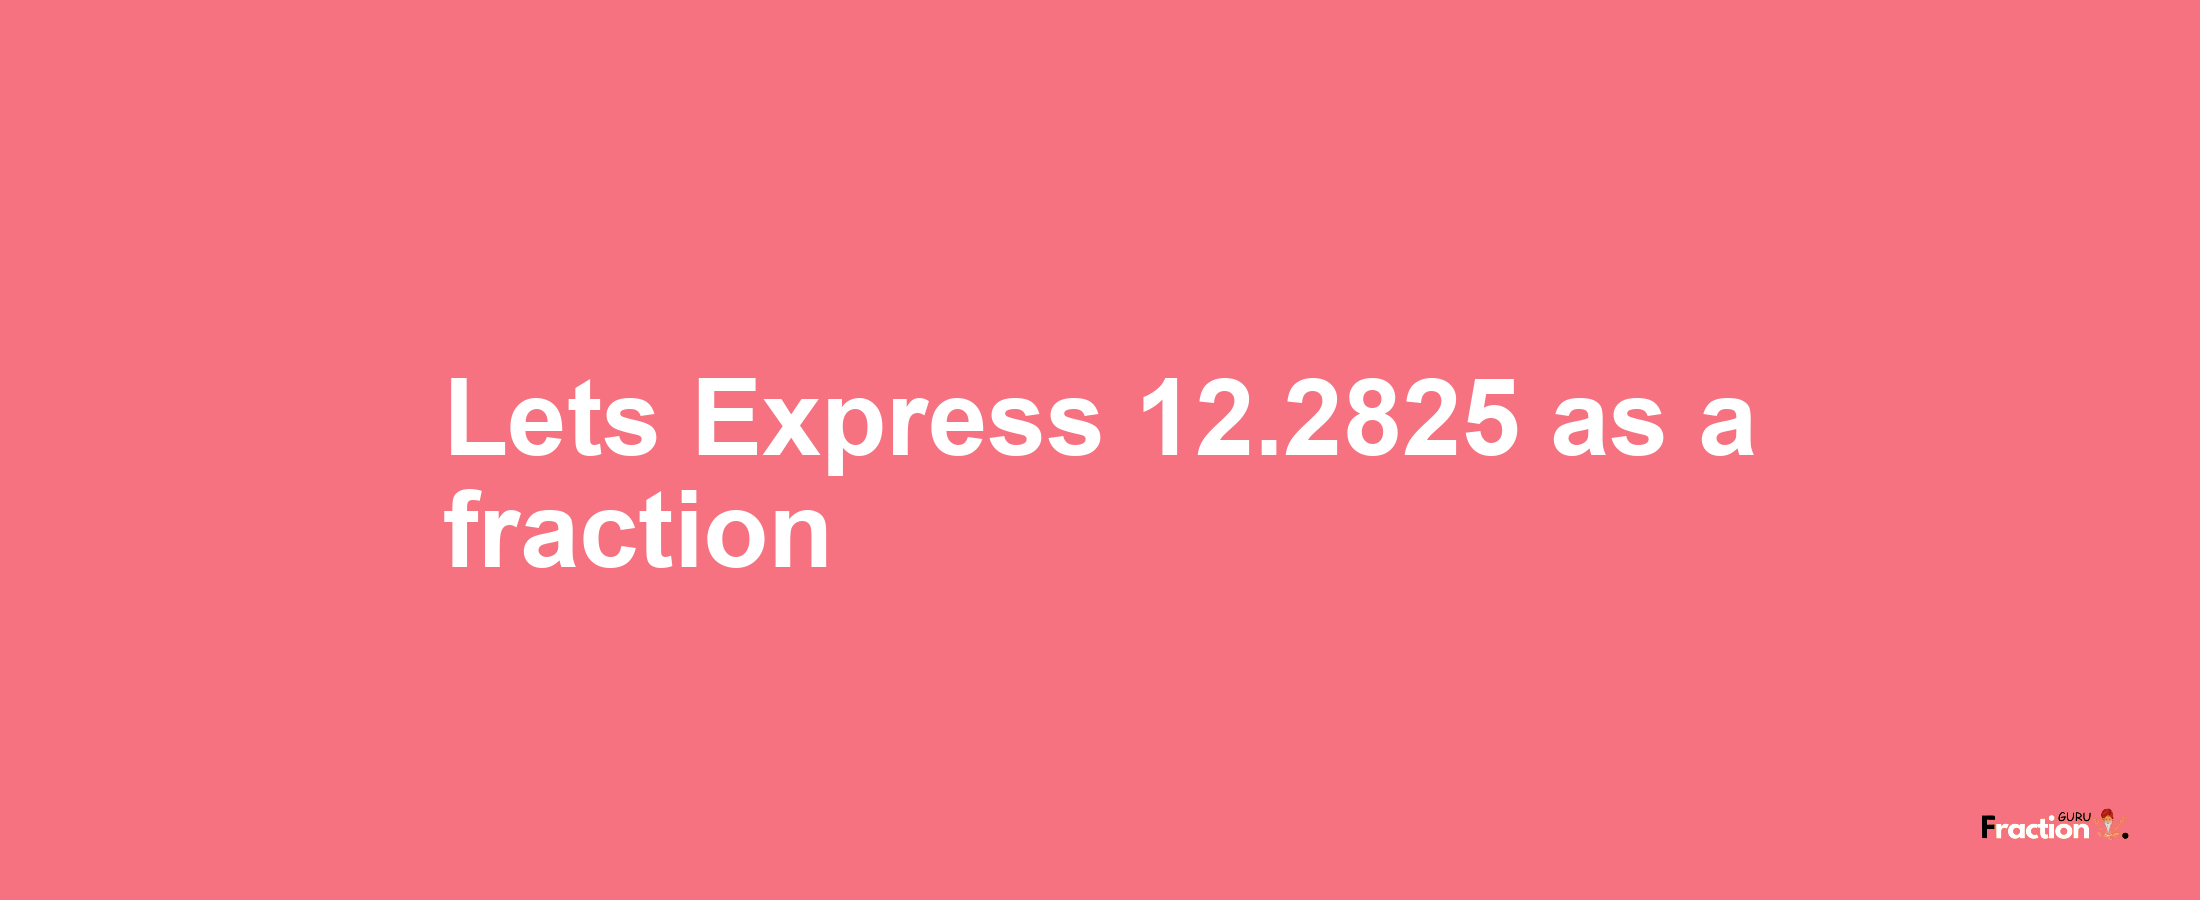 Lets Express 12.2825 as afraction